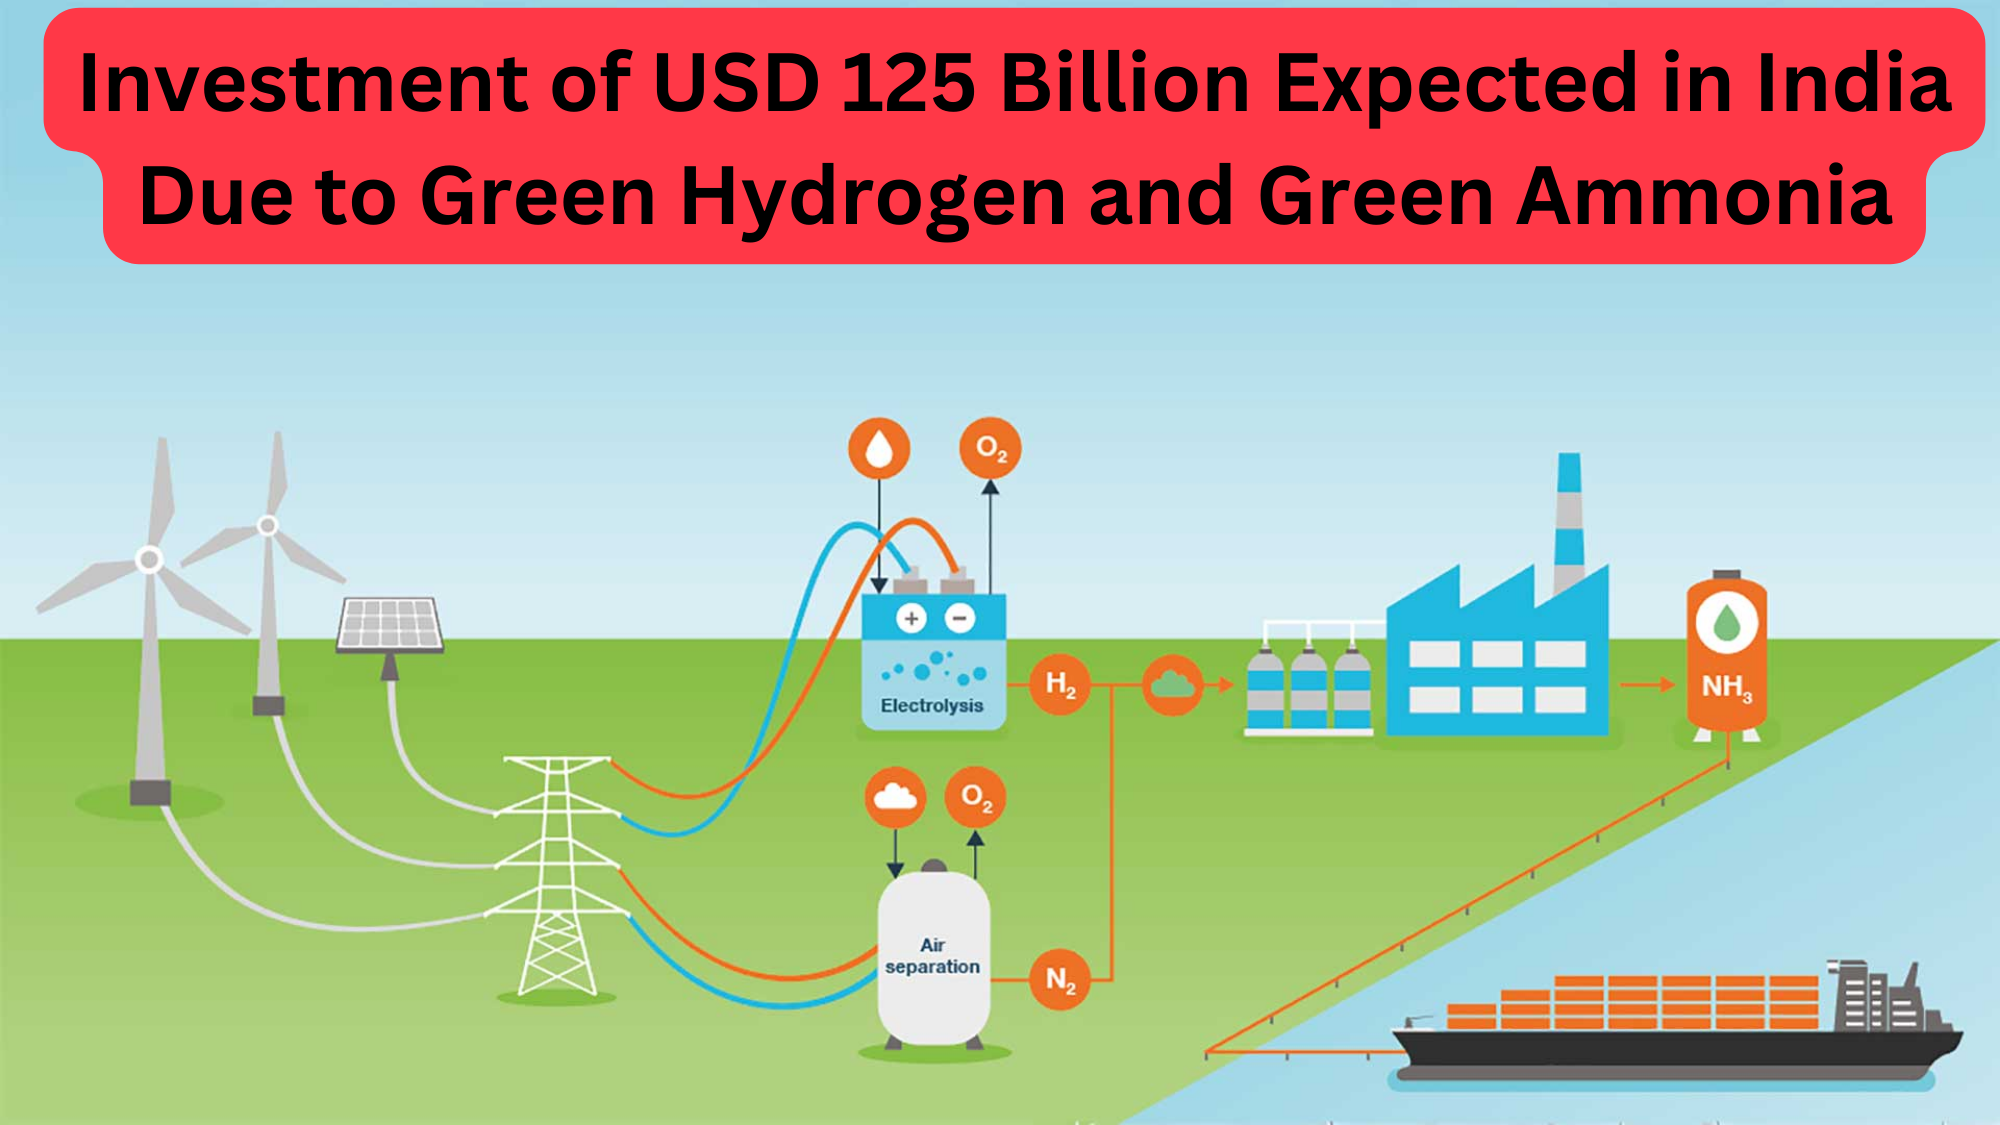 How India New Green Hydrogen and Green Ammonia Investment Force?